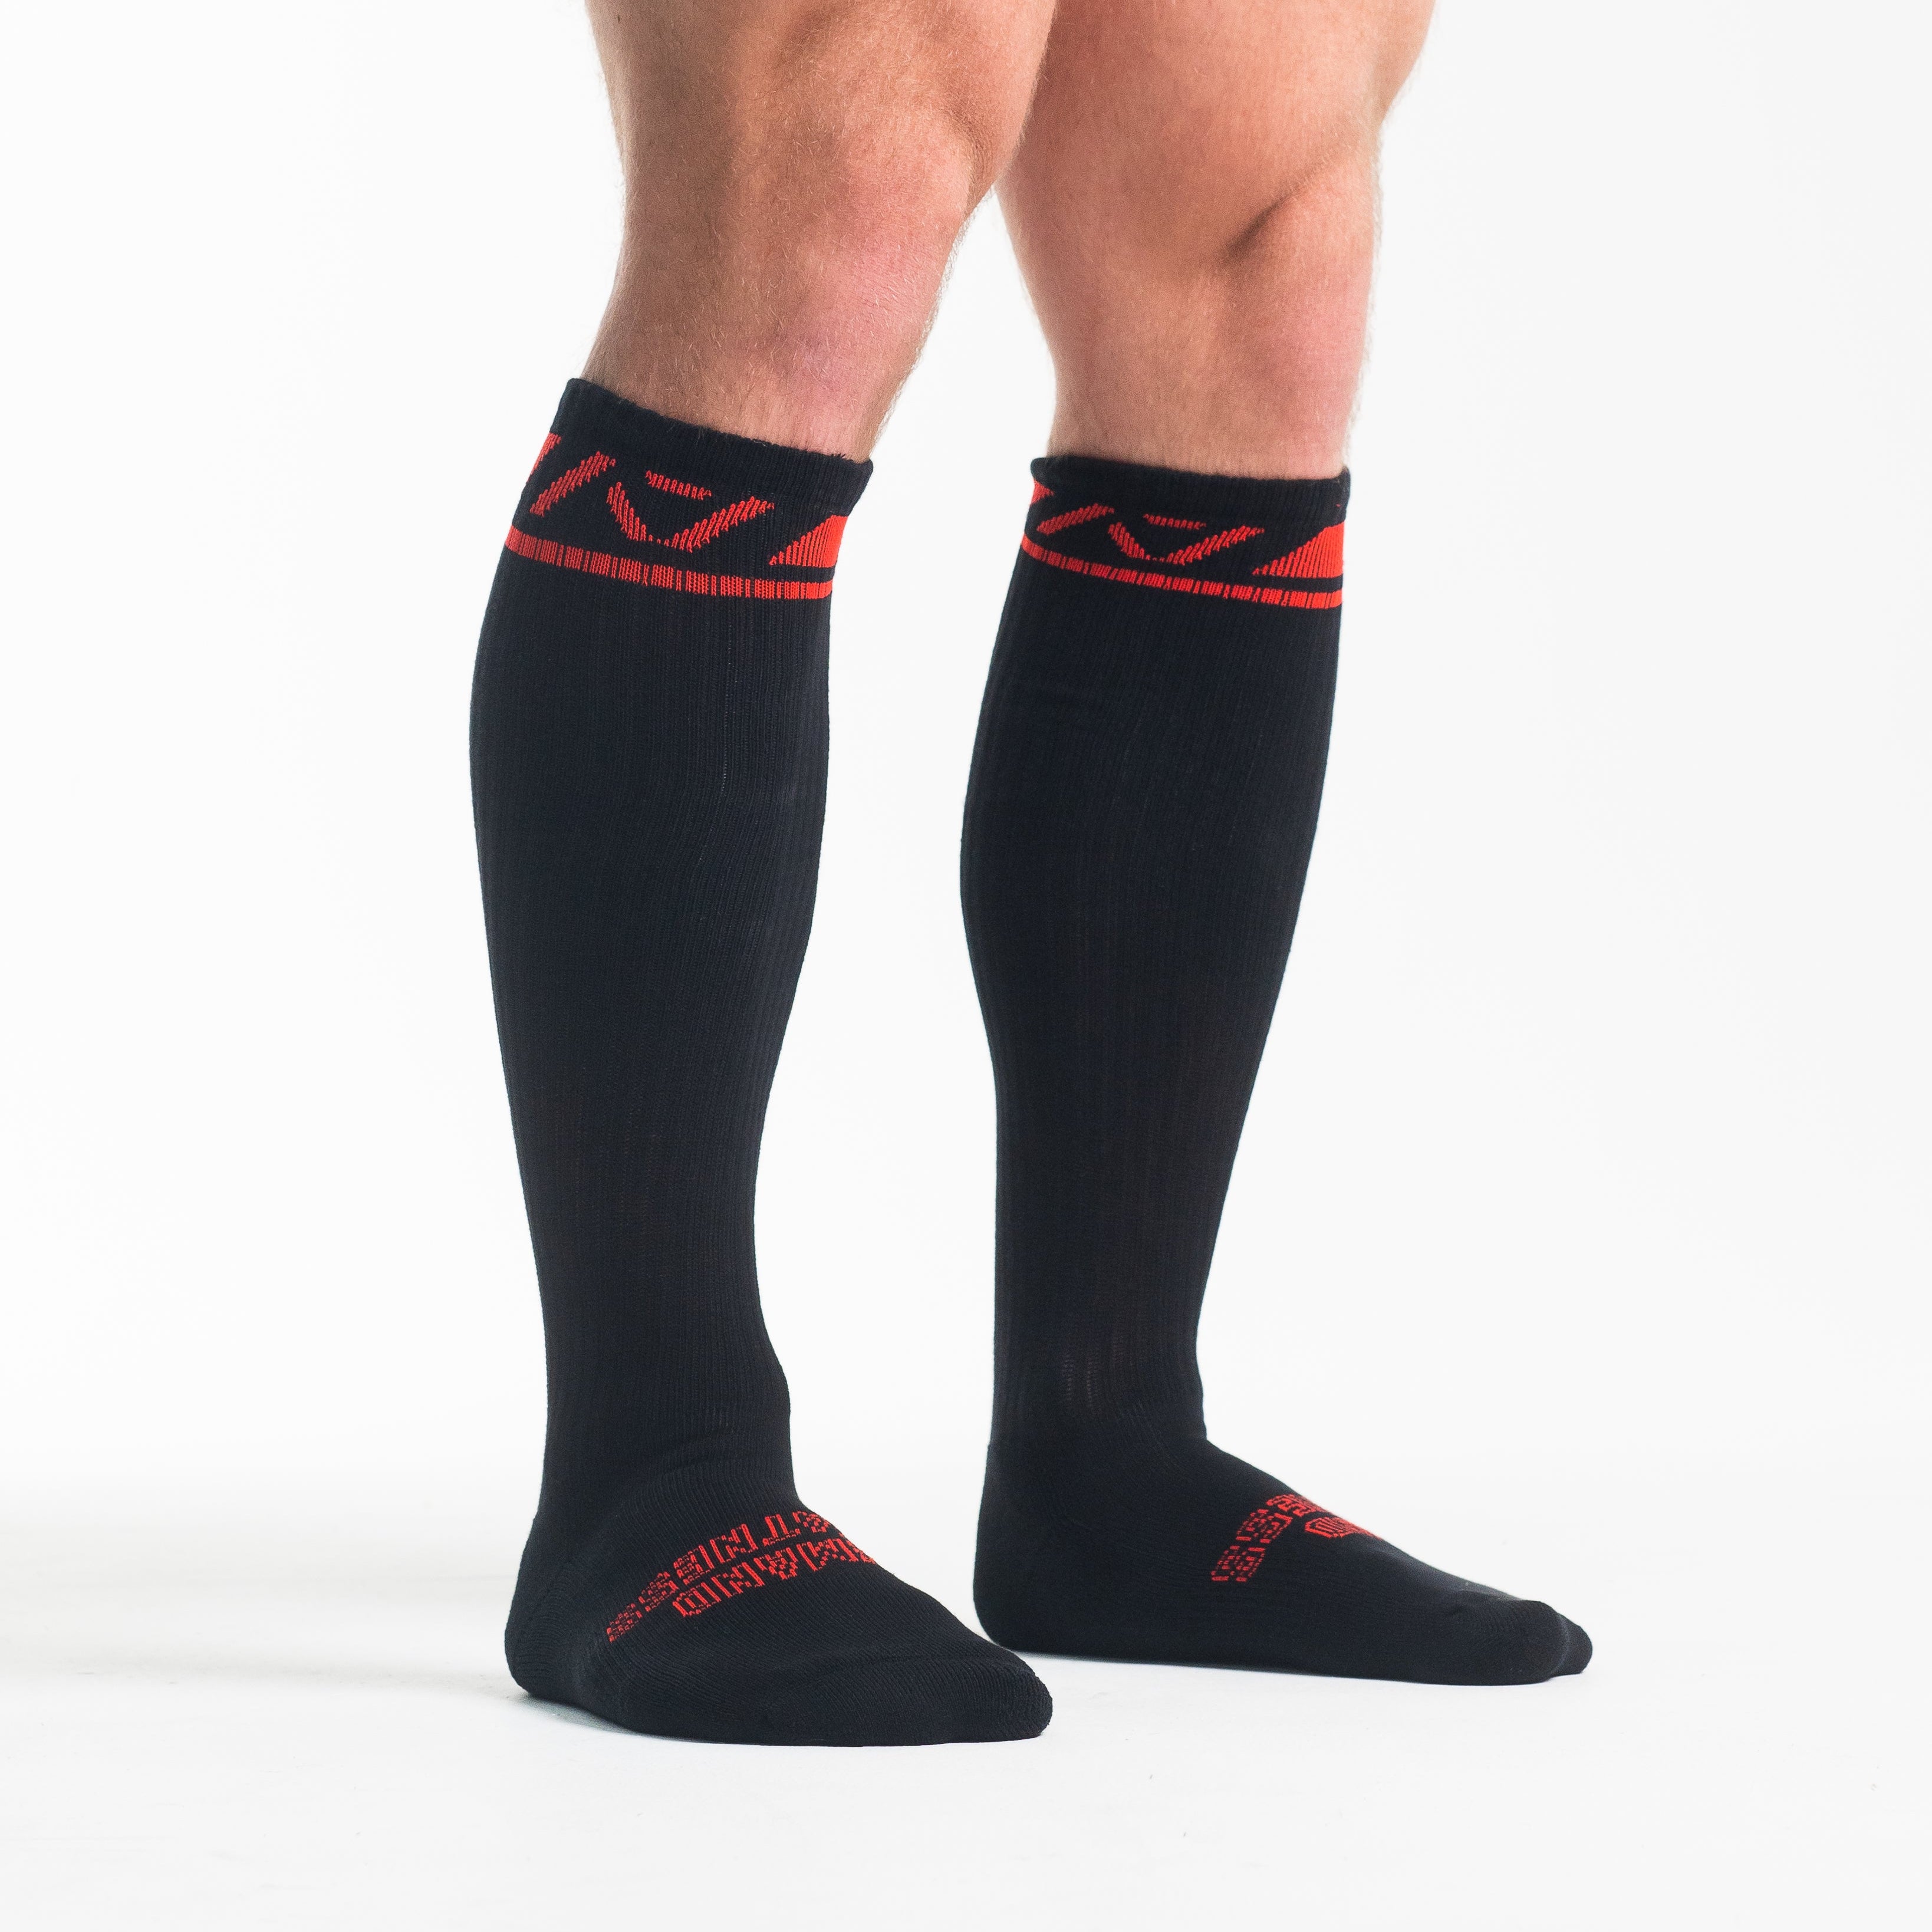 A7 Red Dawn Deadlift socks are designed specifically for pulls and keep your shins protected from scrapes. A7 deadlift socks are a perfect pair to wear in training or powerlifting competition. The IPF Approved Kit includes Powerlifting Singlet, A7 Meet Shirt, A7 Zebra Wrist Wraps, A7 Deadlift Socks, Hourglass Knee Sleeves (Stiff Knee Sleeves and Rigor Mortis Knee Sleeves). All A7 Powerlifting Equipment shipping to UK, Norway, Switzerland and Iceland.